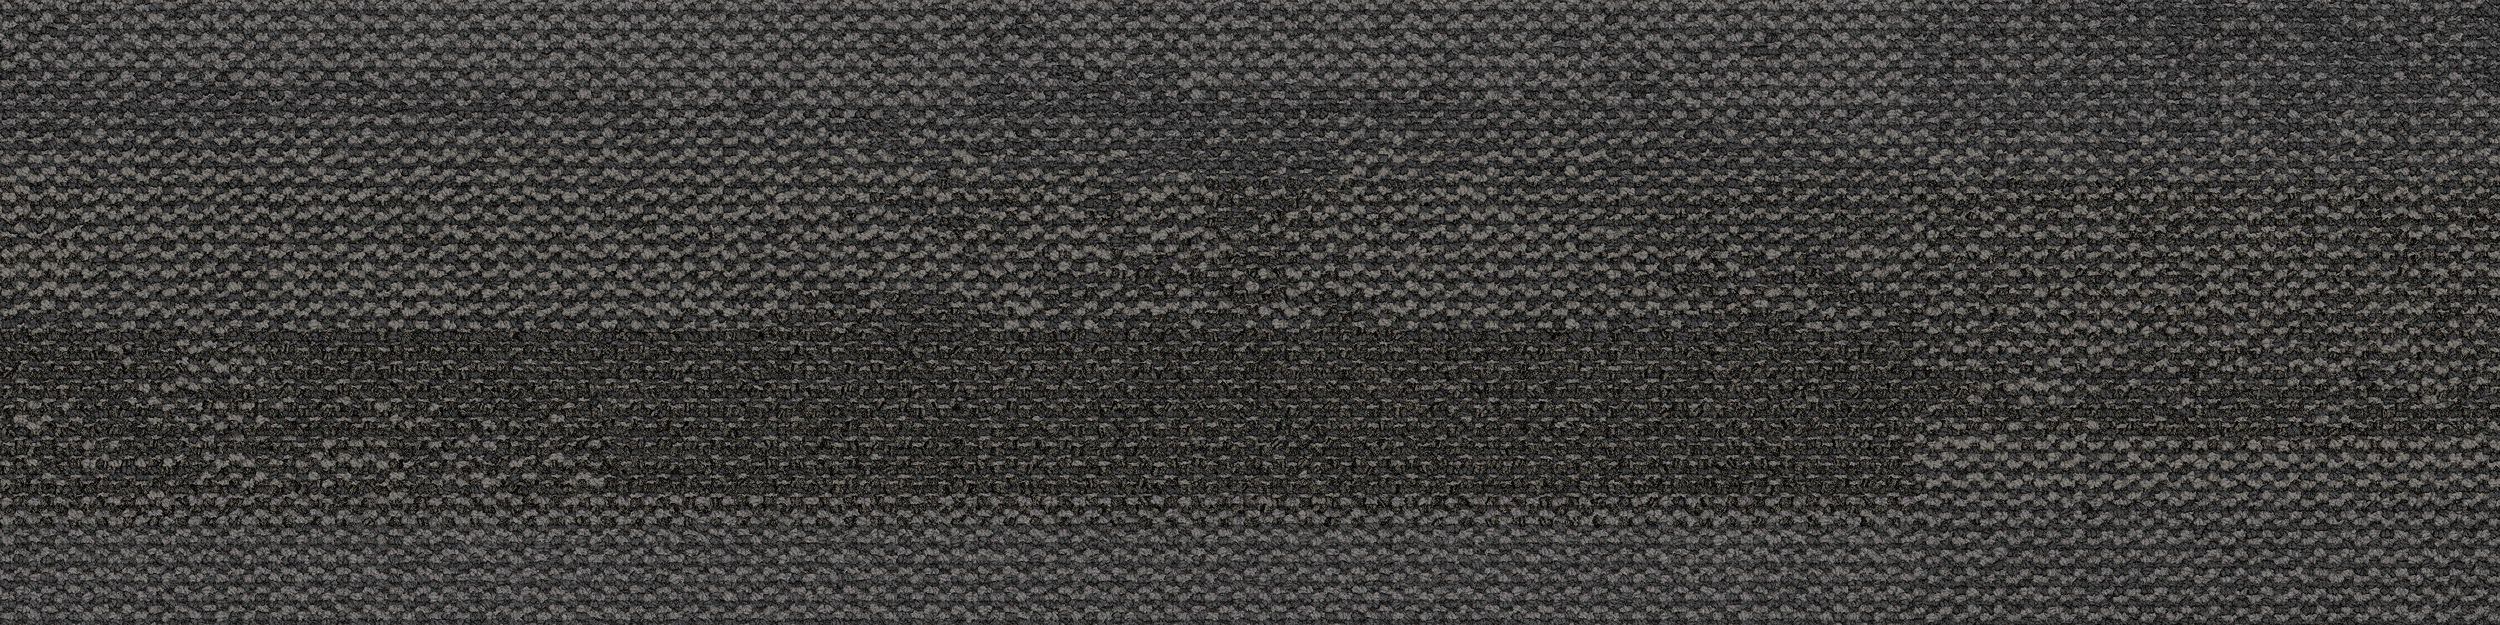 Naturally Weathered Carpet Tile In Burnt Ember image number 2